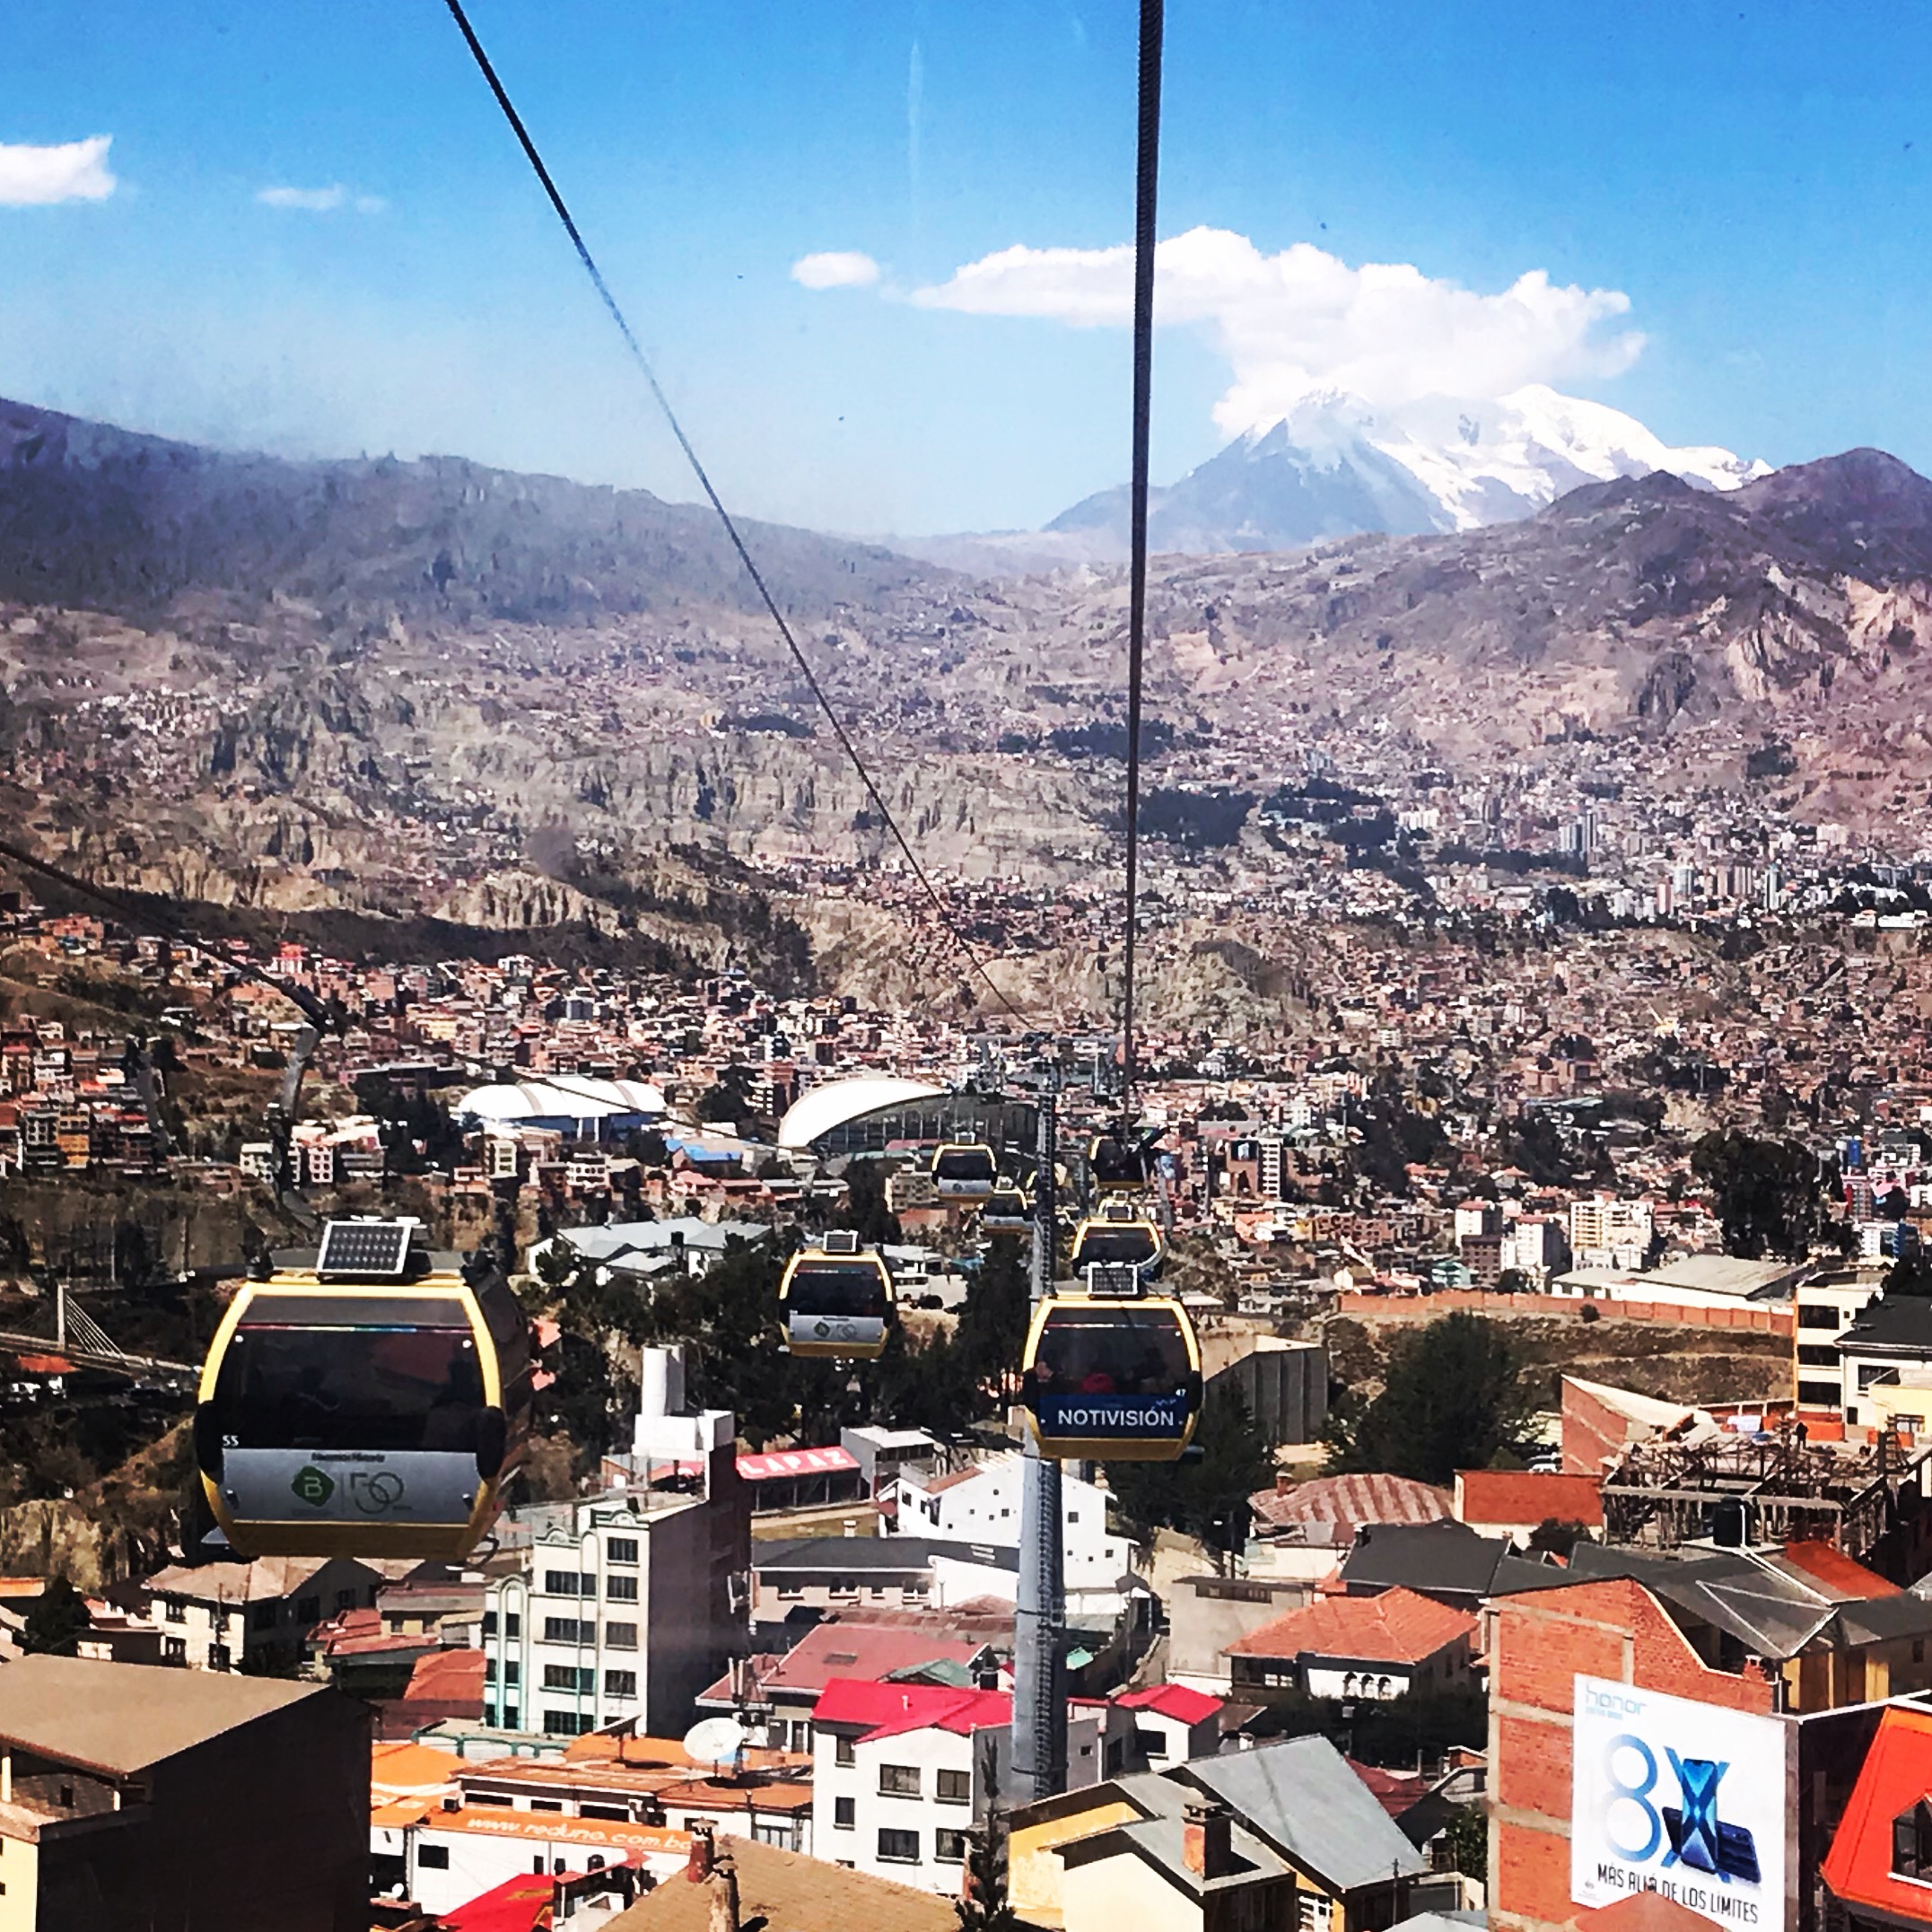 Taking the cable car is one of my favorite things when in La Paz